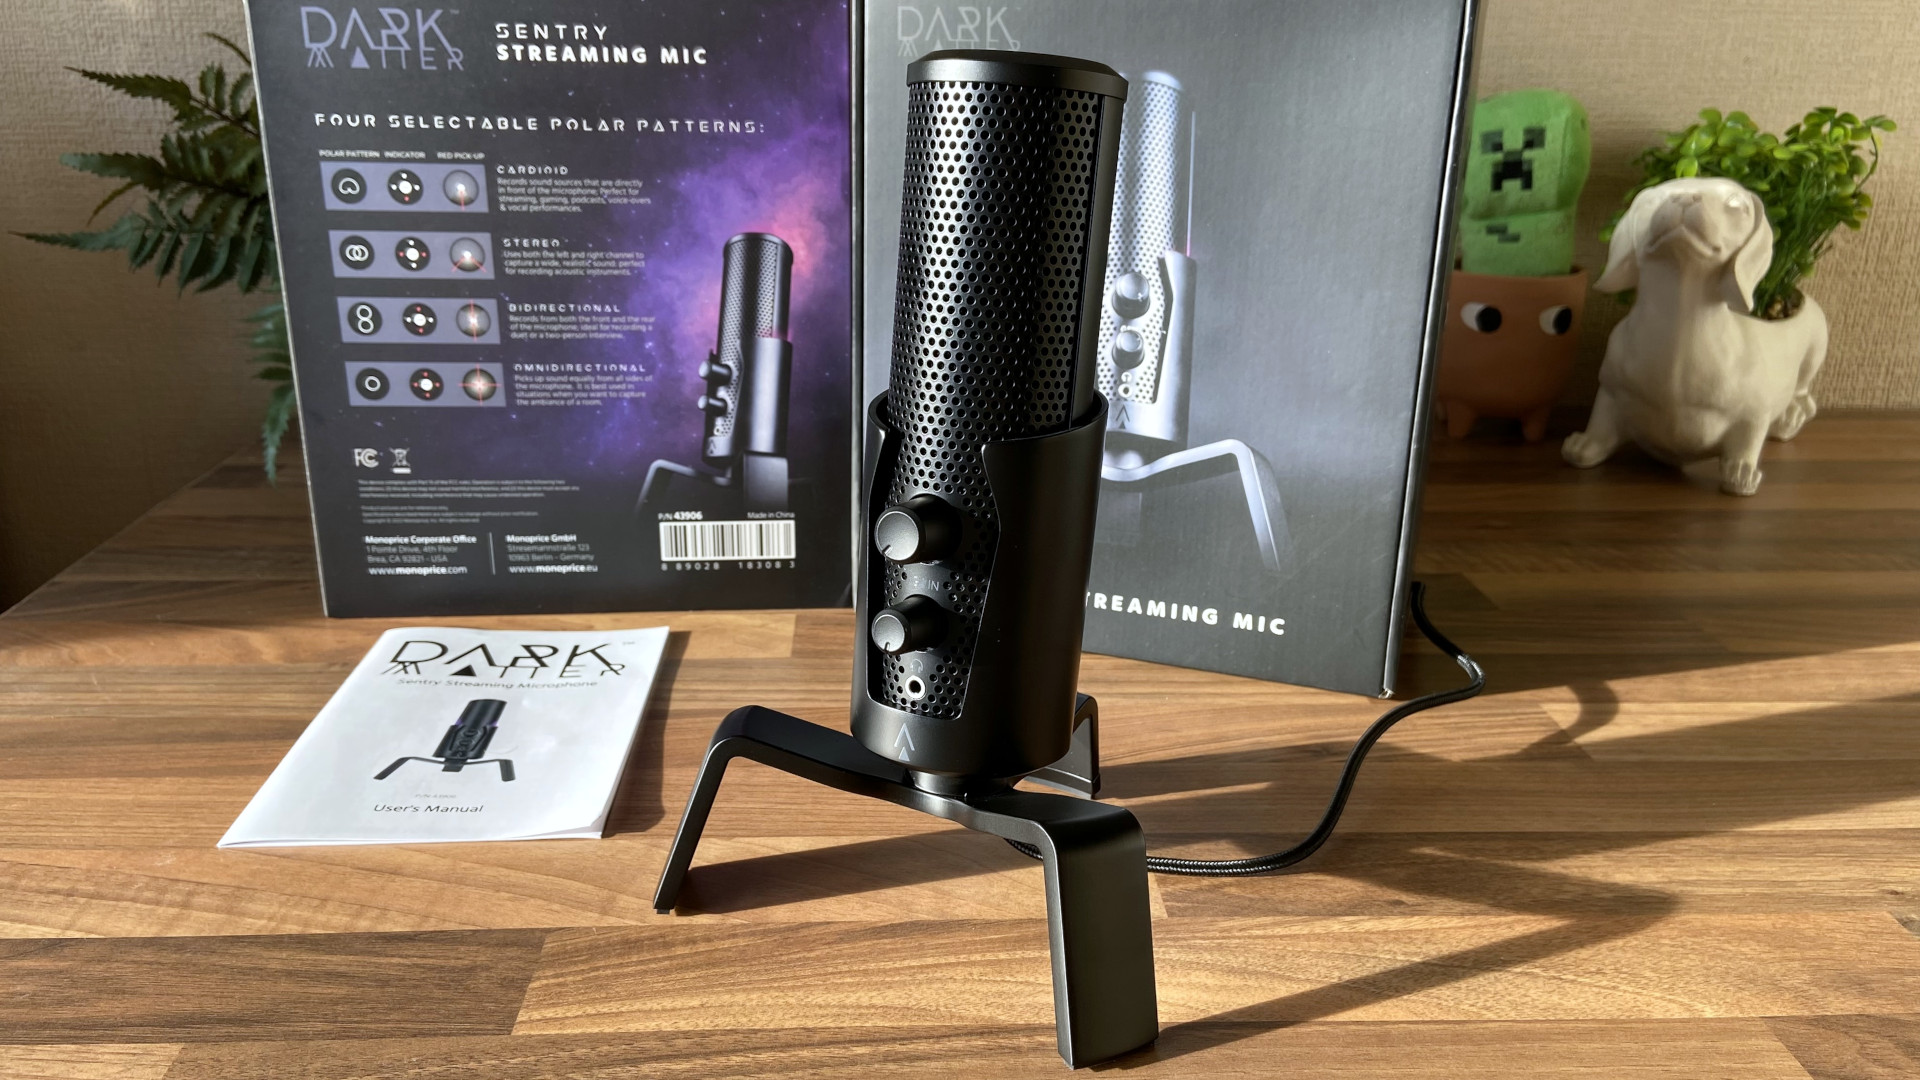 Monoprice wanted the Dark Matter Sentry USB mic to undercut the Blue Yeti — and they almost nailed it